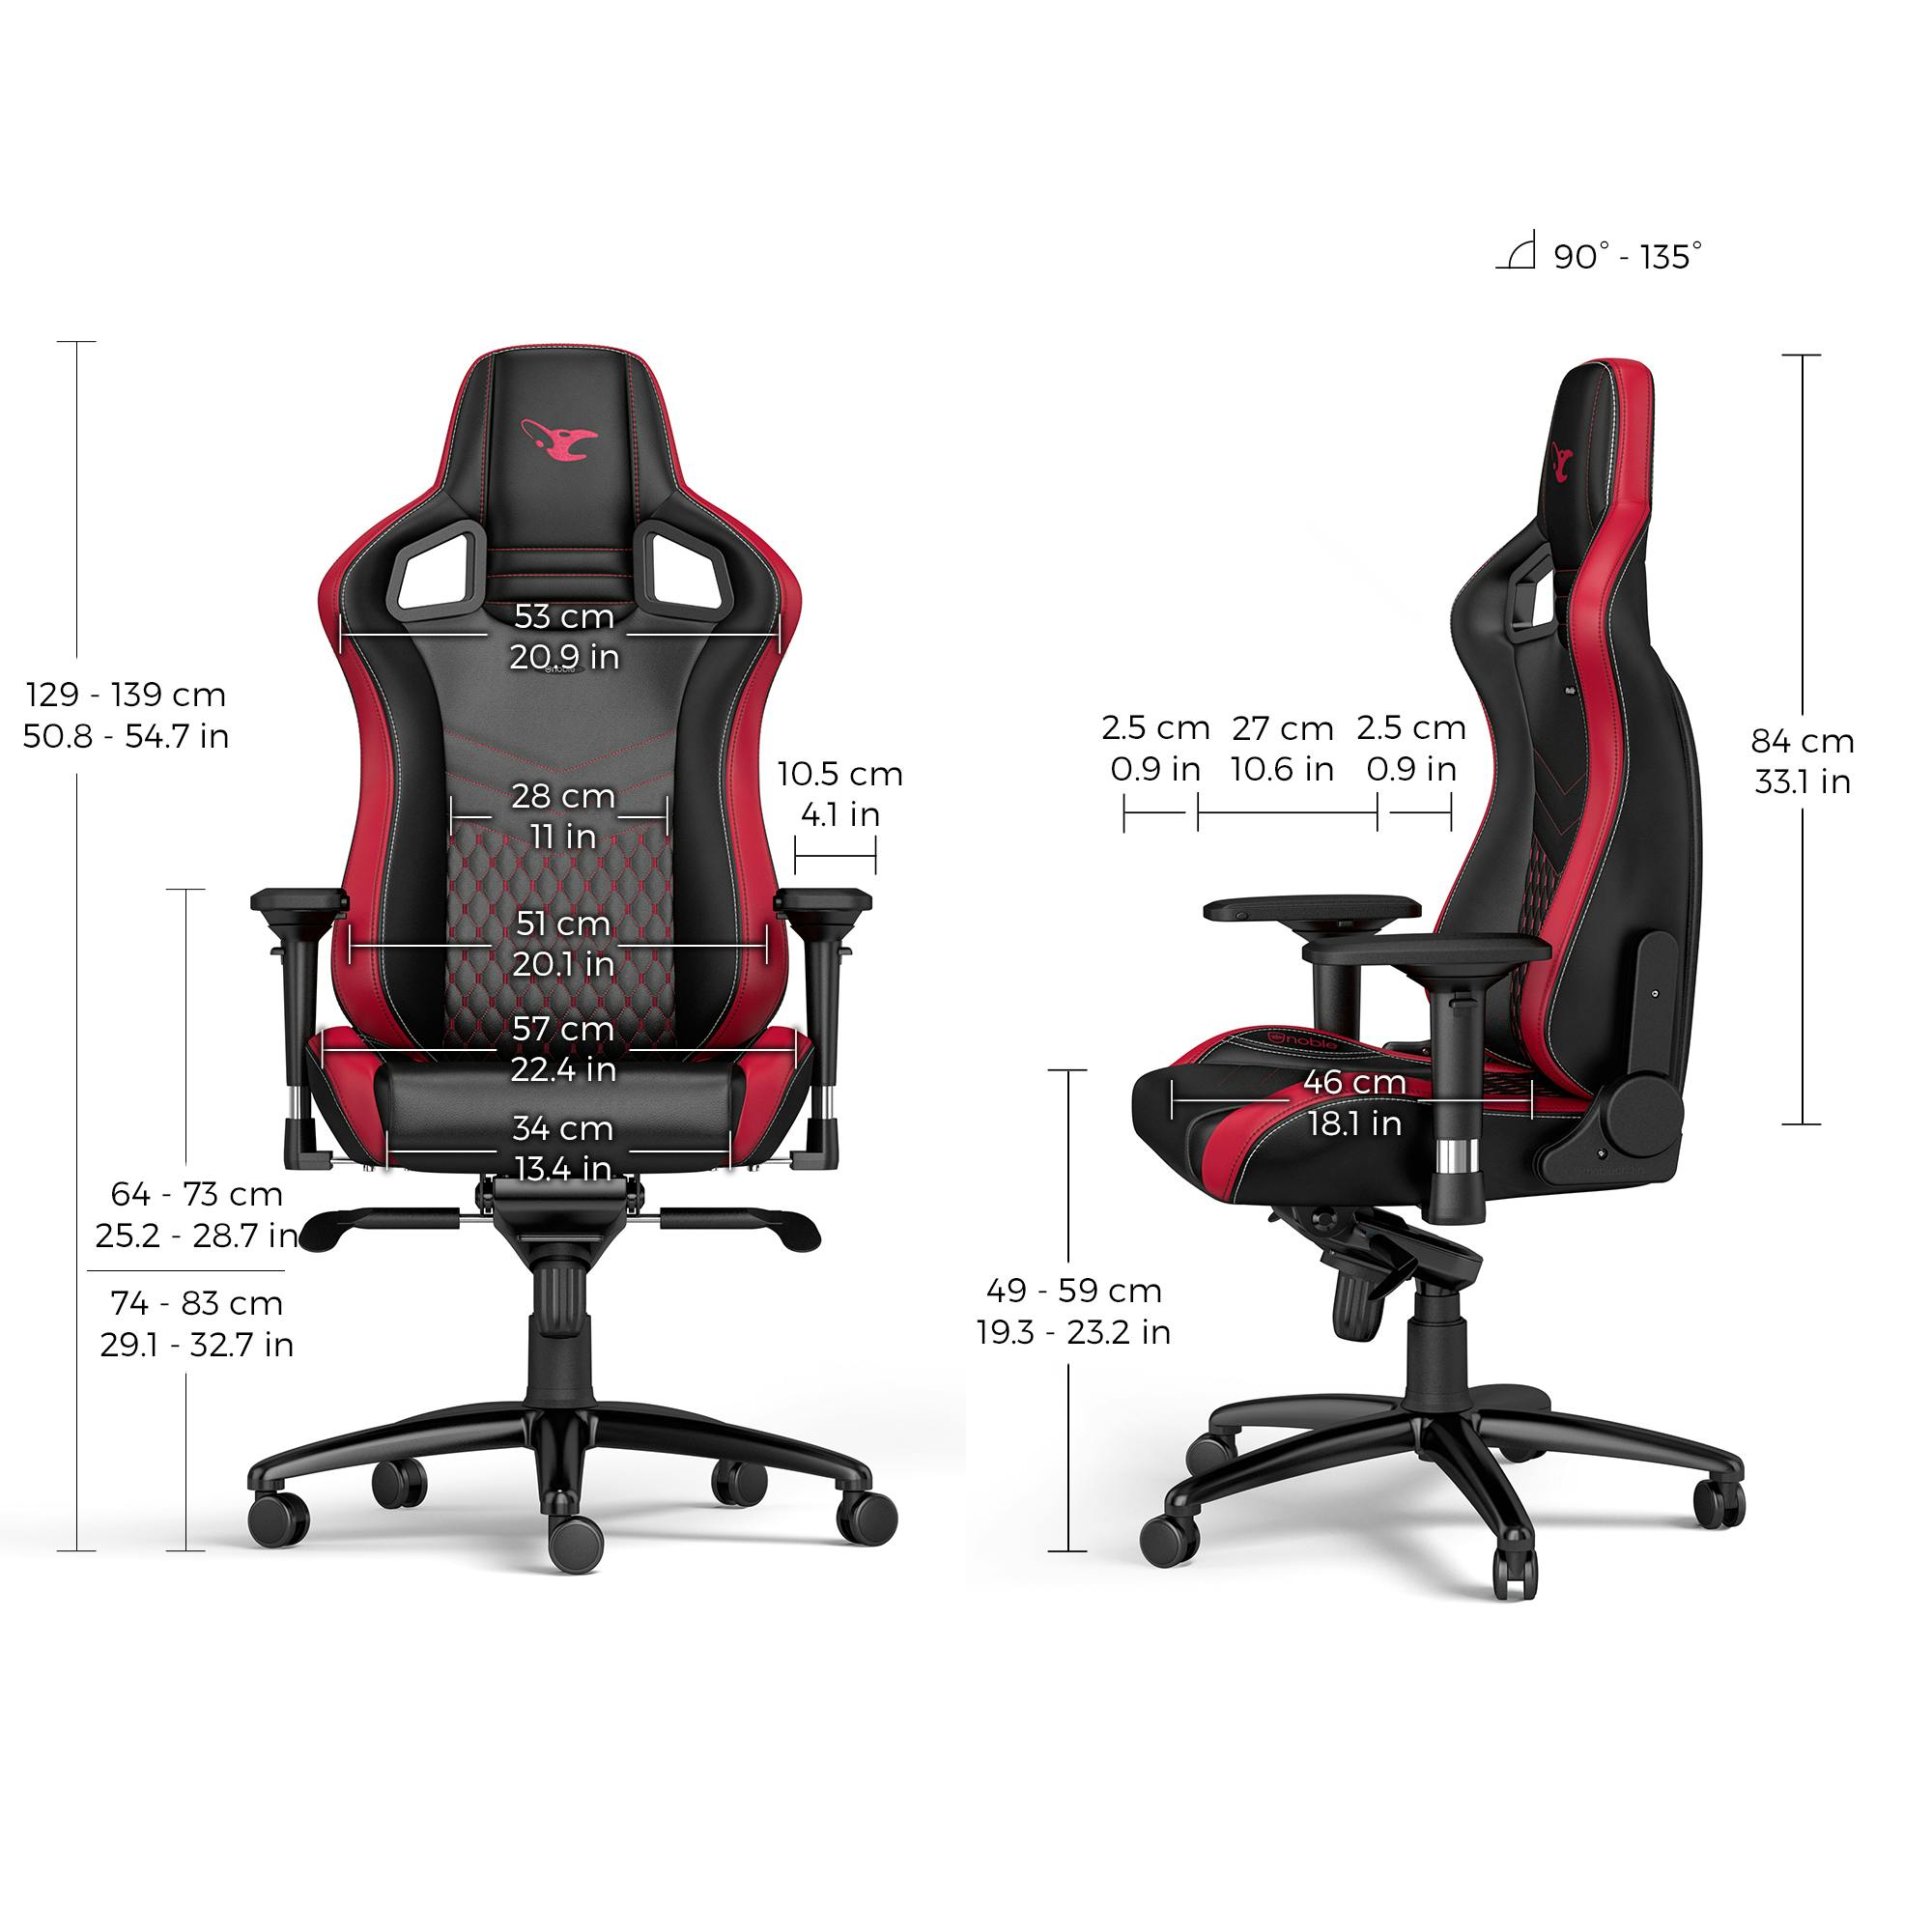 noblechairs - EPIC mousesports Edition